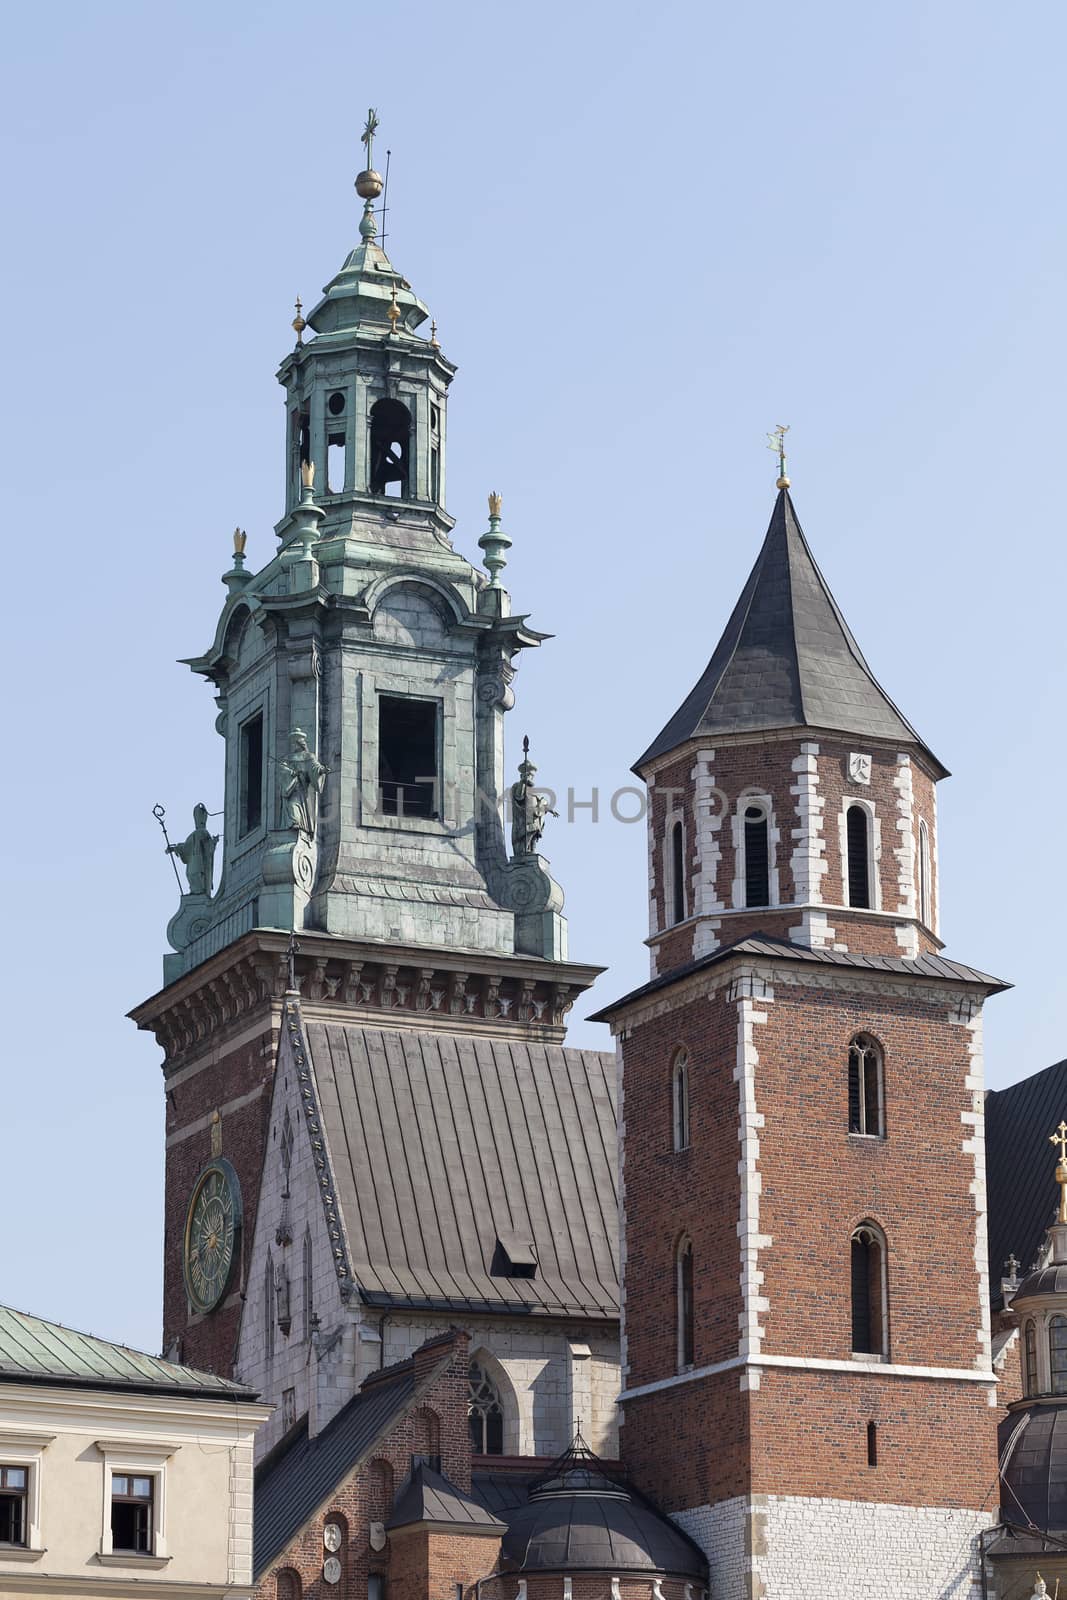 view on clock tower of Wawel Royal Castle in Cracow, Poland